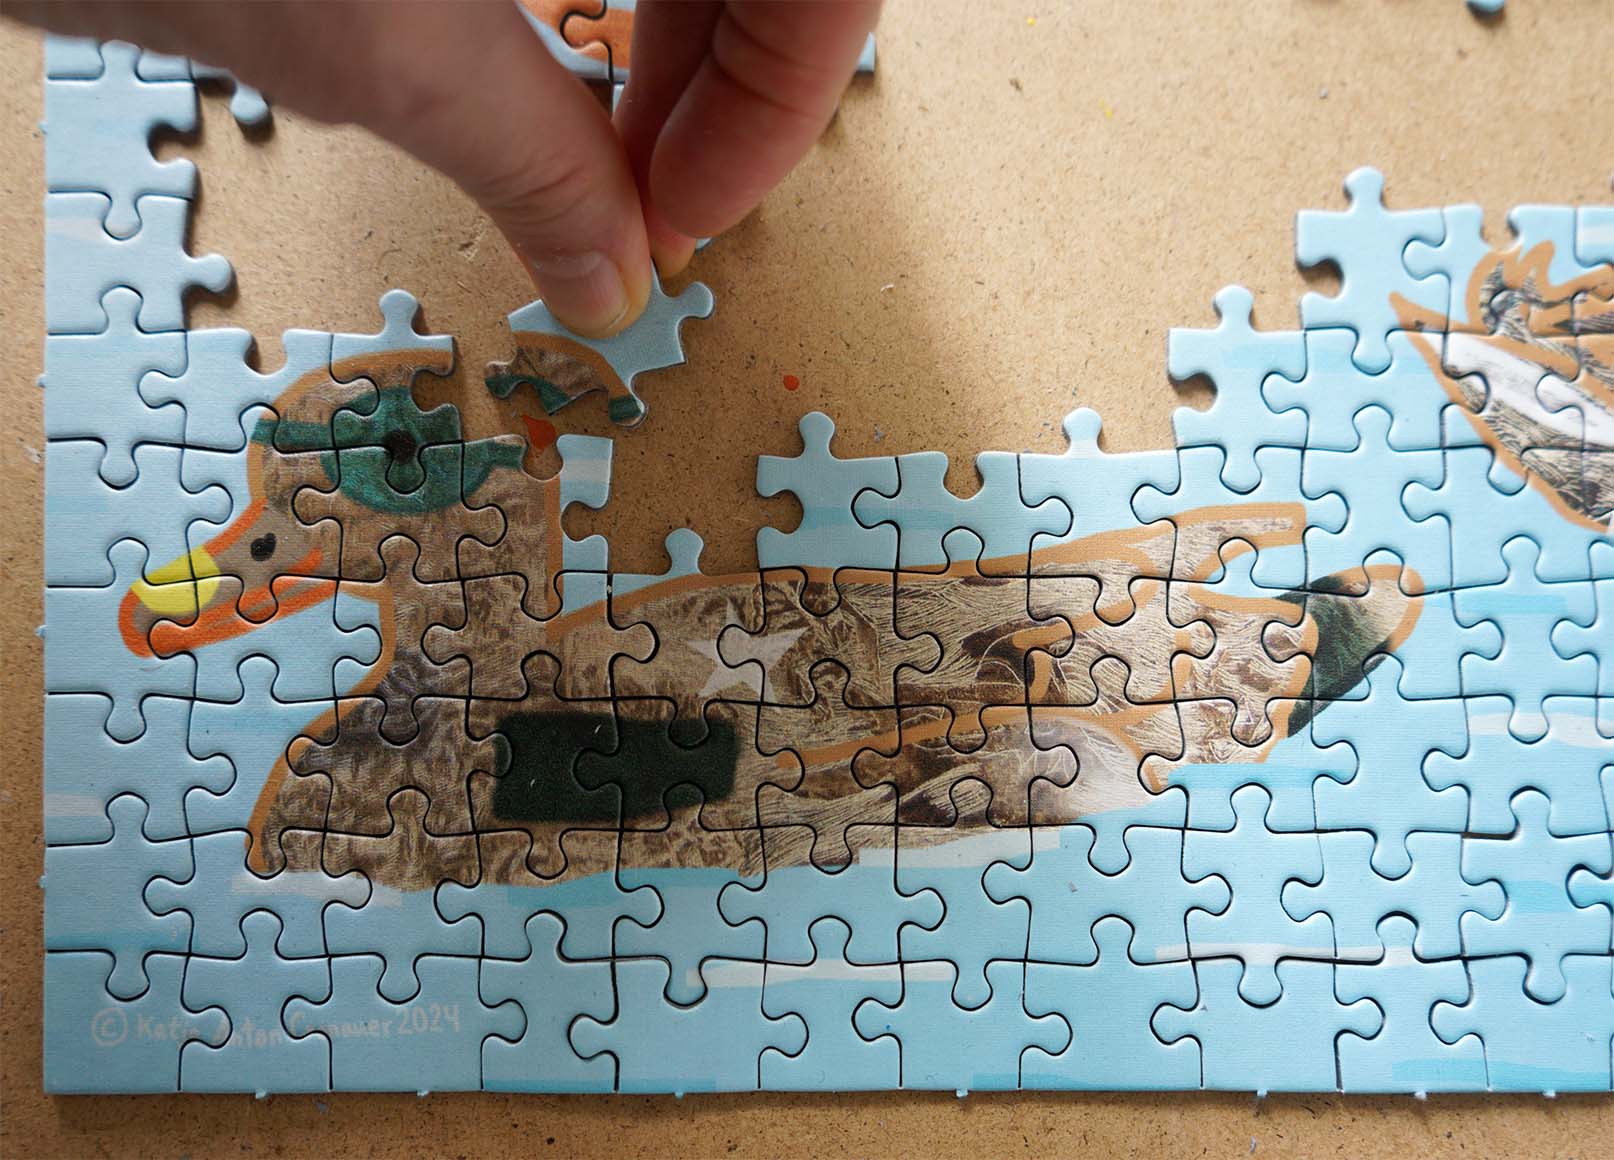 A hand places a puzzle piece to complete the motif of a duck with an eye patch in its plumage. Copyright Katja Anton Cronauer is in the corner of the puzzle.